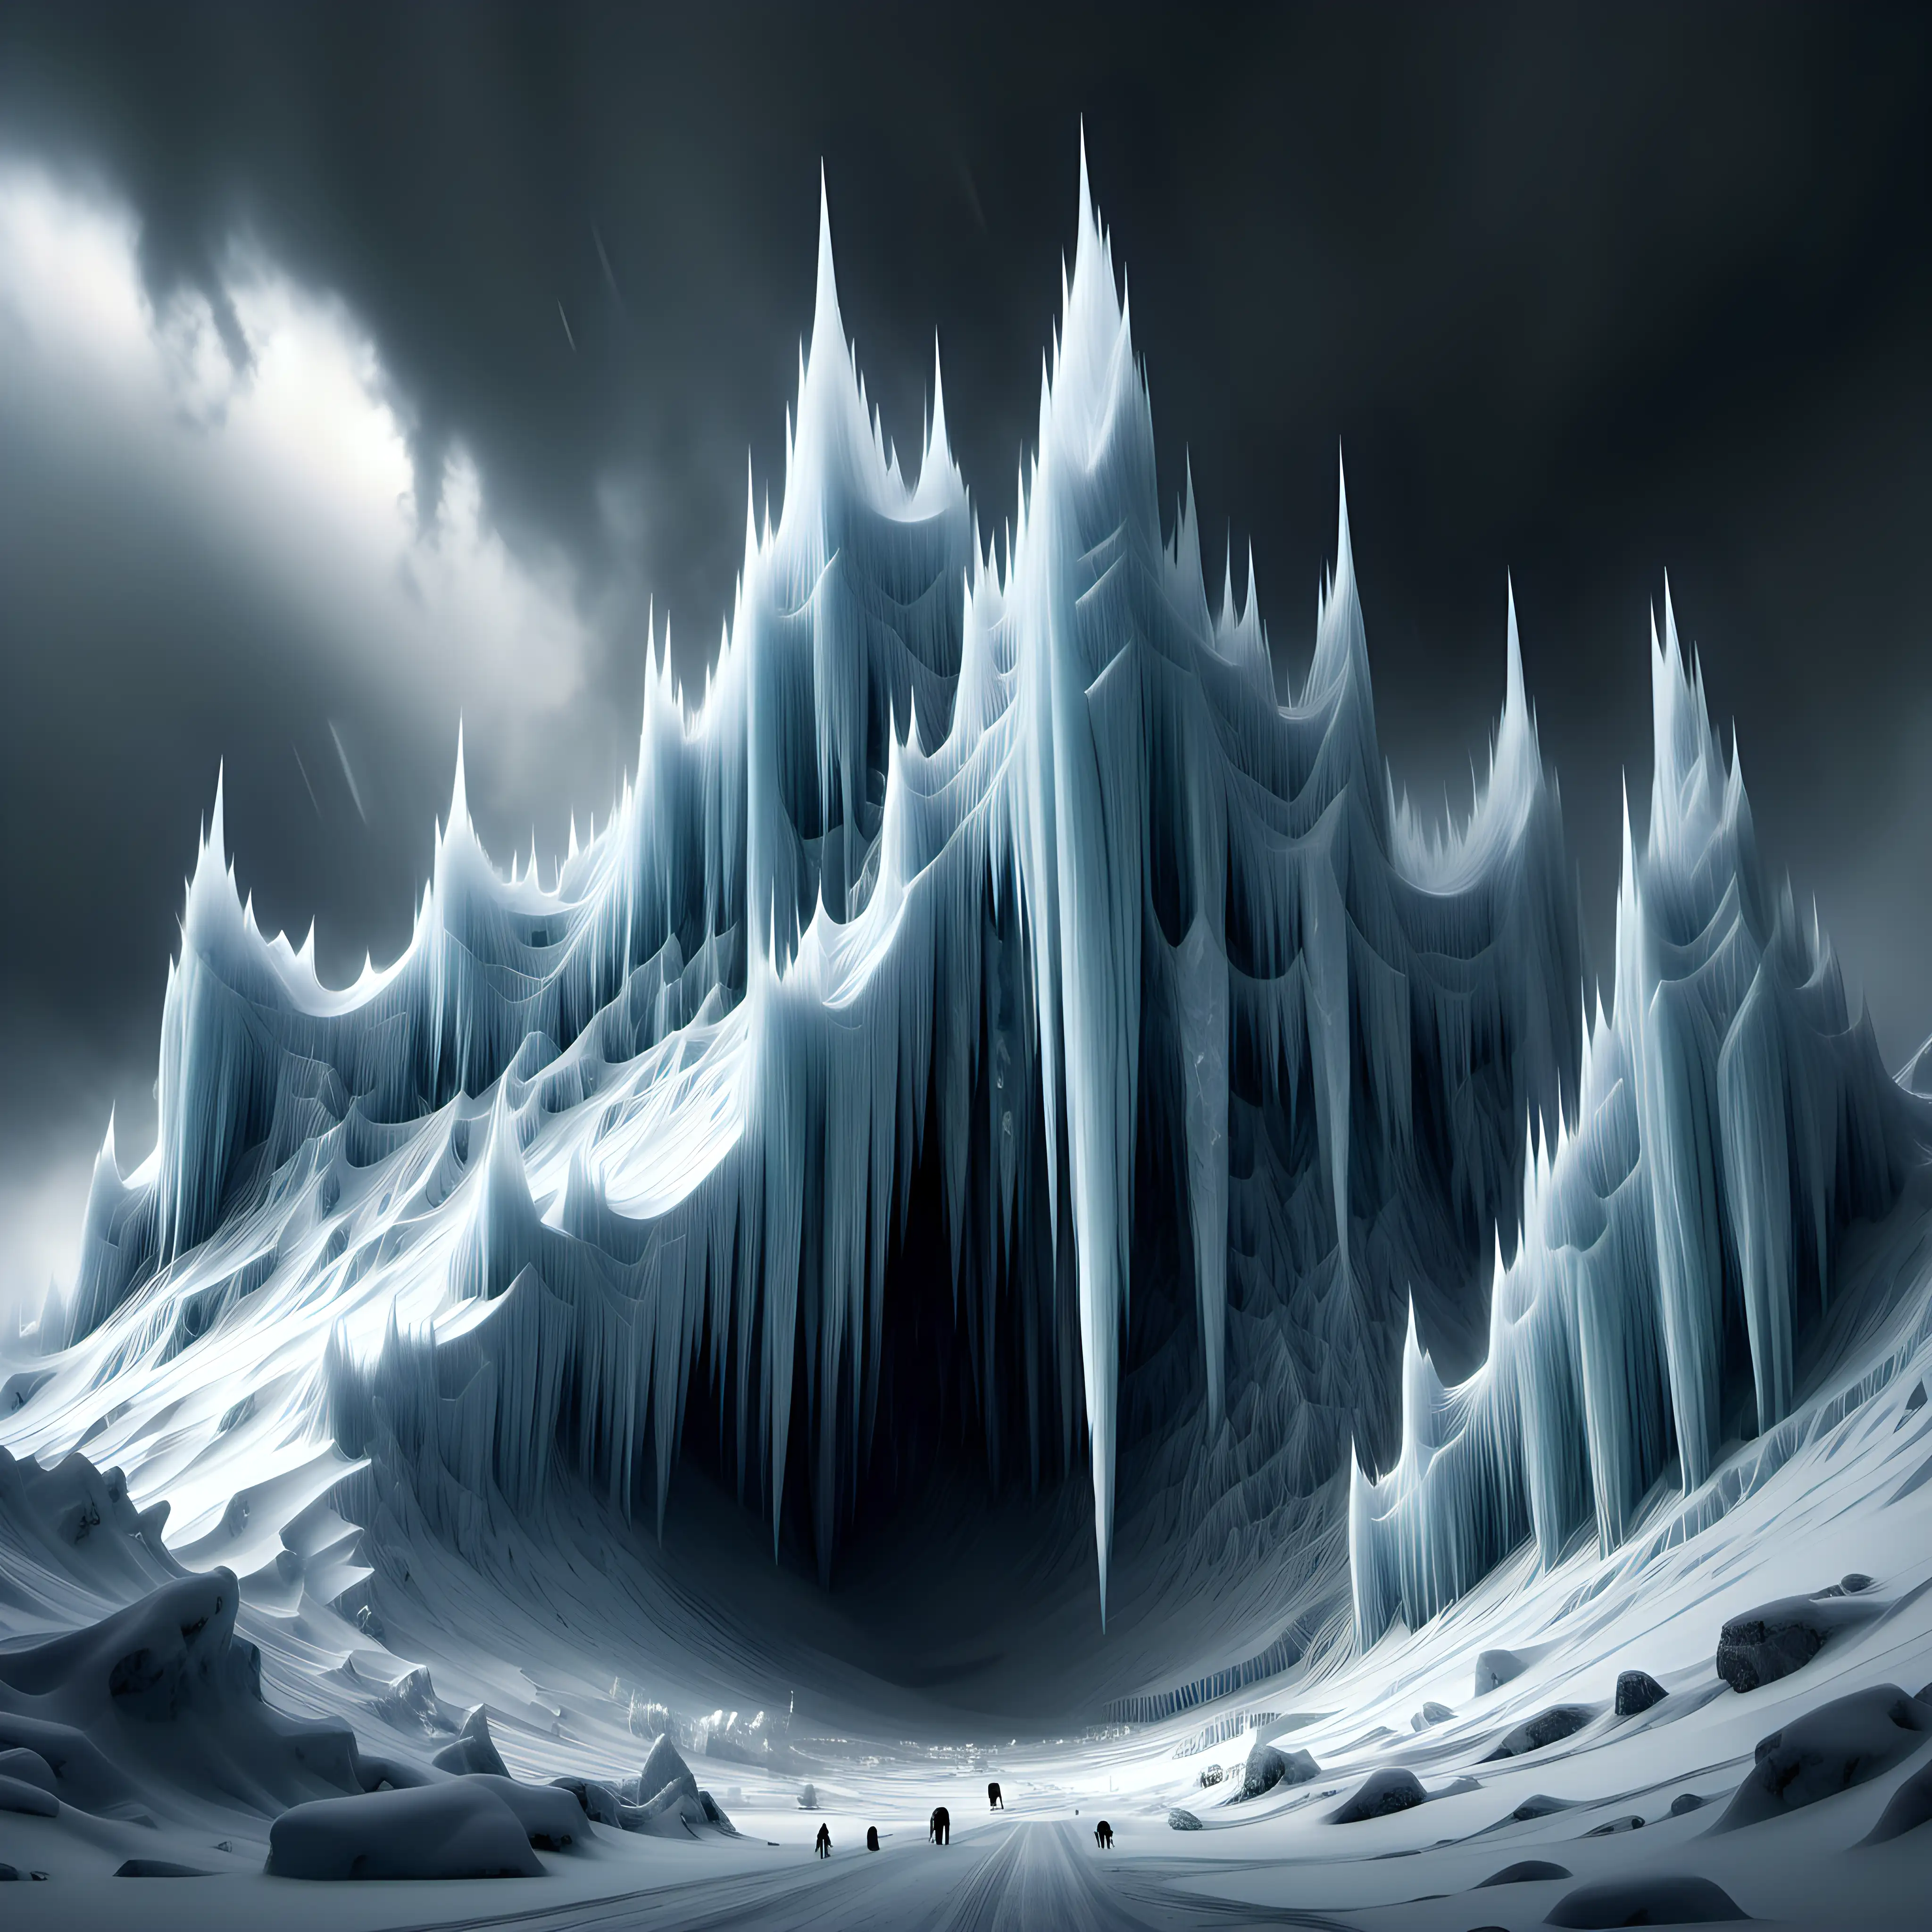 Immense, snowy mountains with shapes resembling ice castles in a snow storm